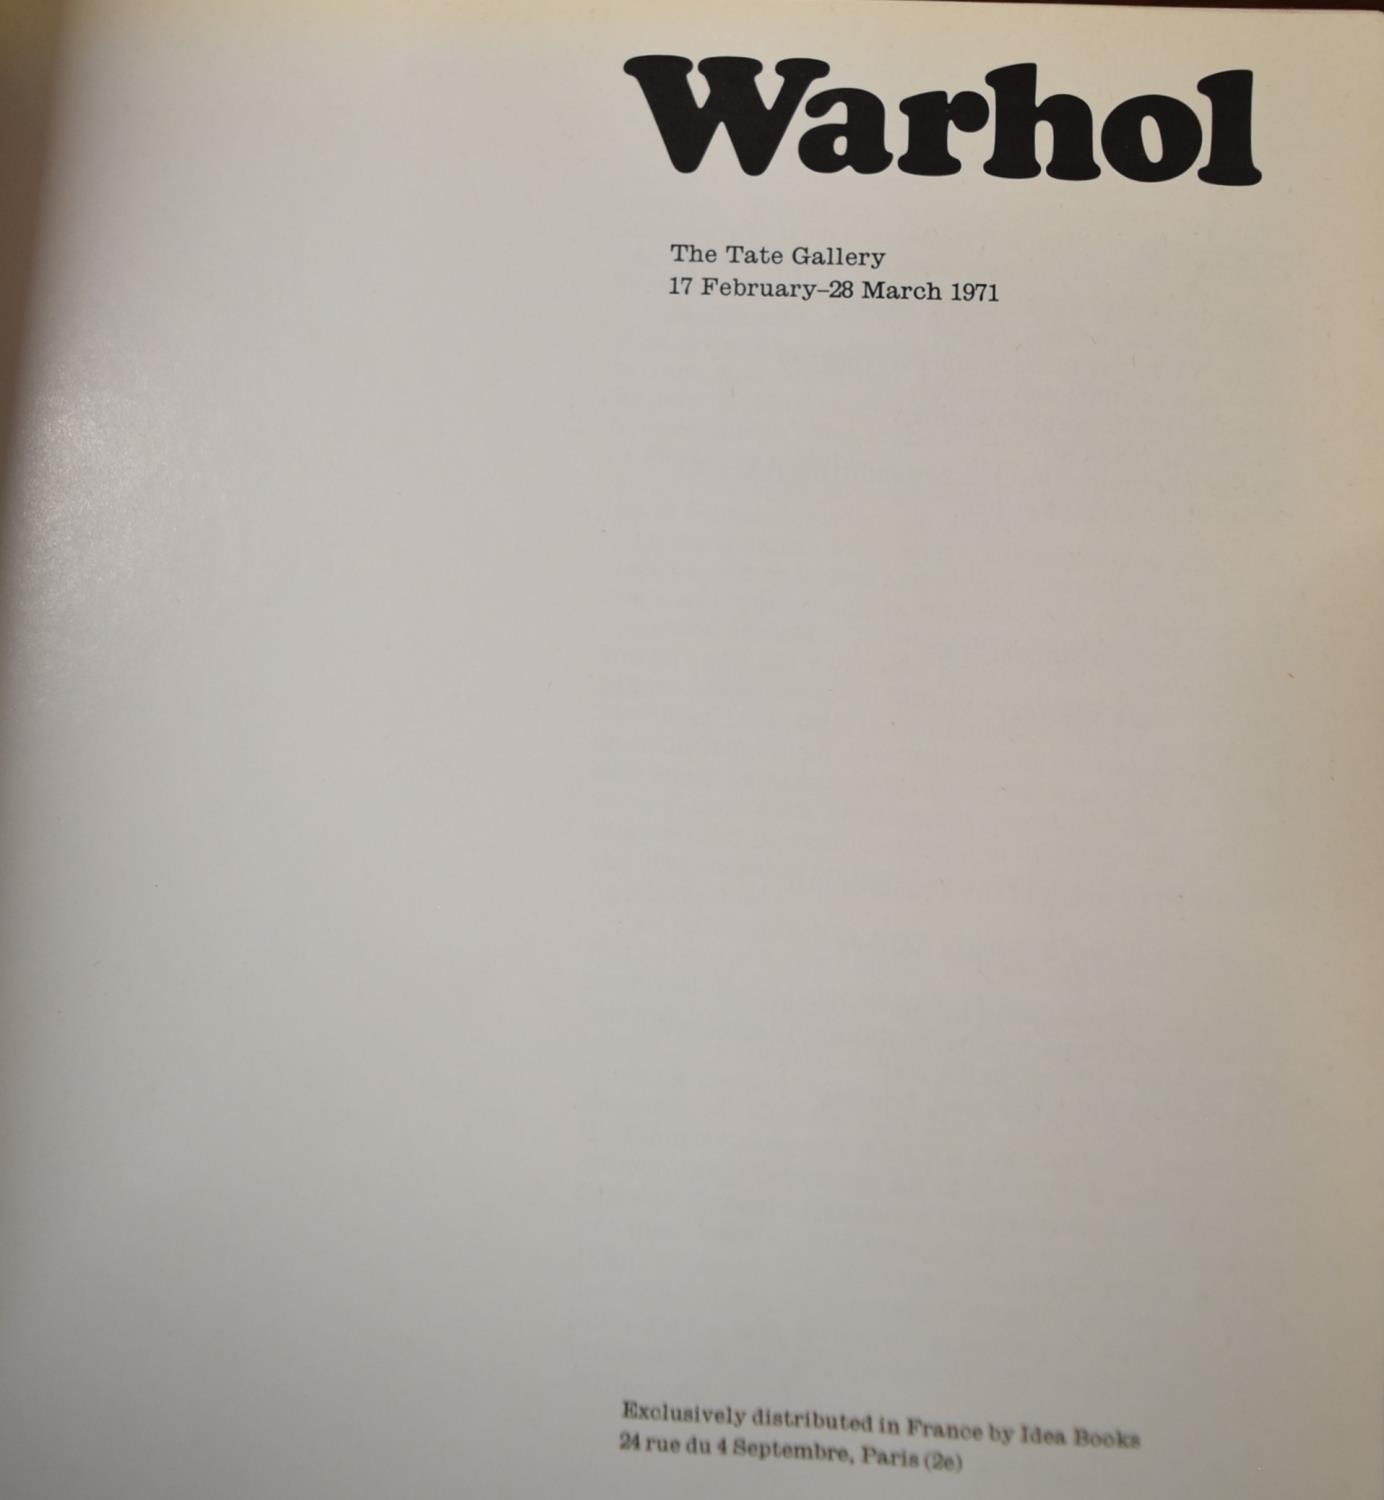 Andy Warhol; an exhibition catalogue dating 17.2.1971 to 28.3.1971 at the Tate Gallery, London. - Image 2 of 6